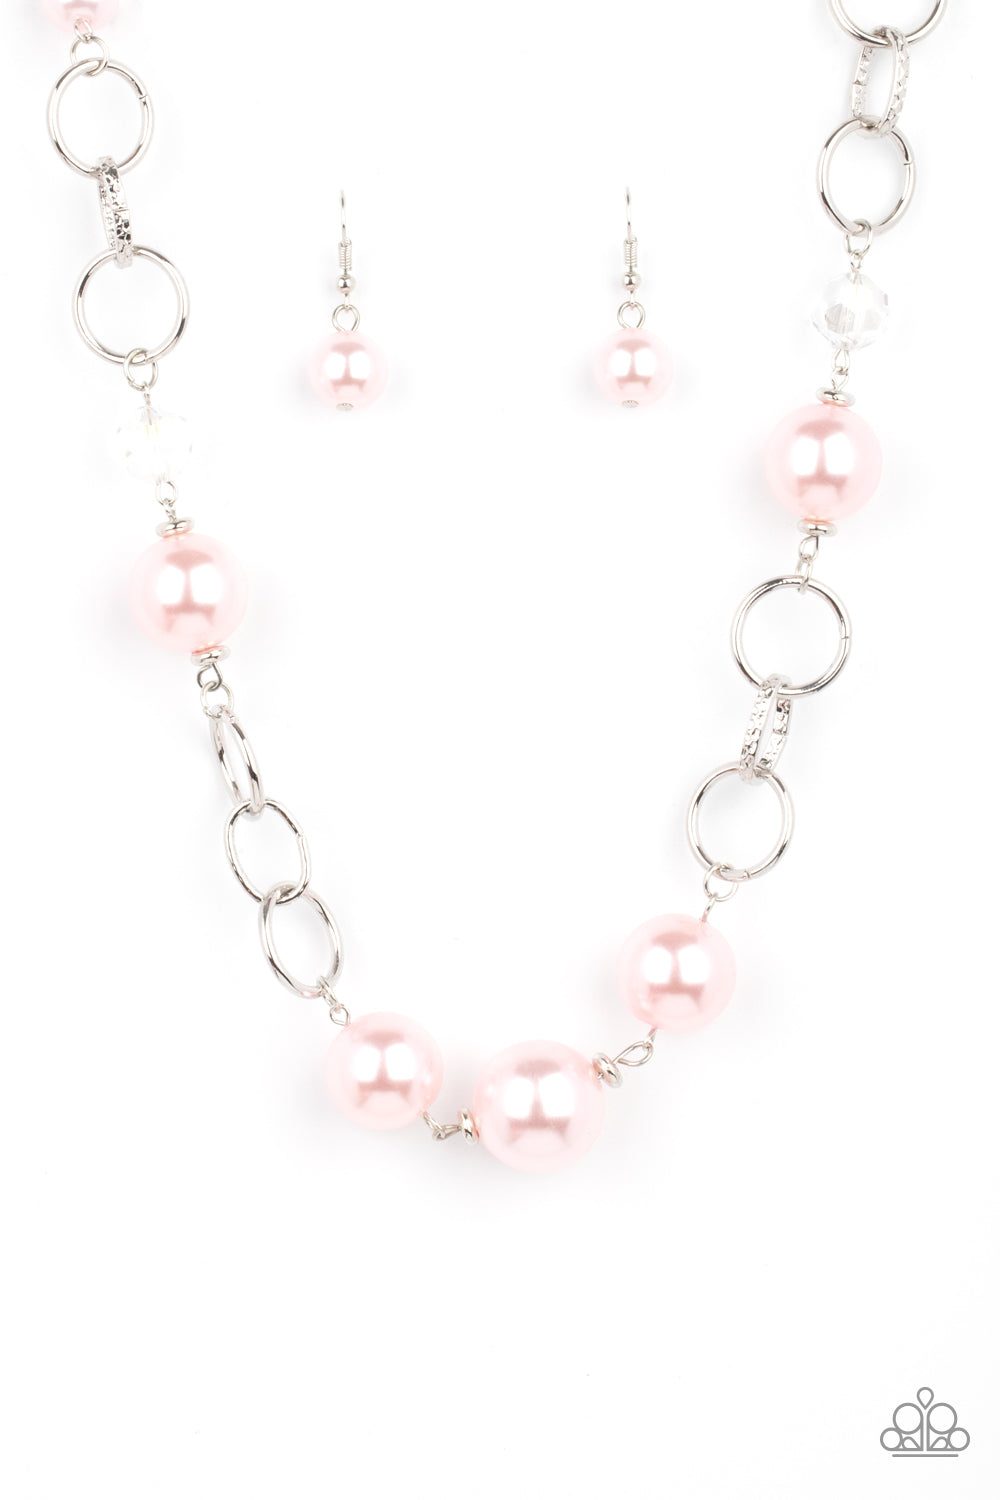 New Age Novelty Pink Pearl Necklace - Paparazzi Accessories  Sections of bold silver links, oversized pink pearls, and glassy crystal-like beads haphazardly connect below the collar, creating a dramatic display. Features an adjustable clasp closure.  Sold as one individual necklace. Includes one pair of matching earrings.